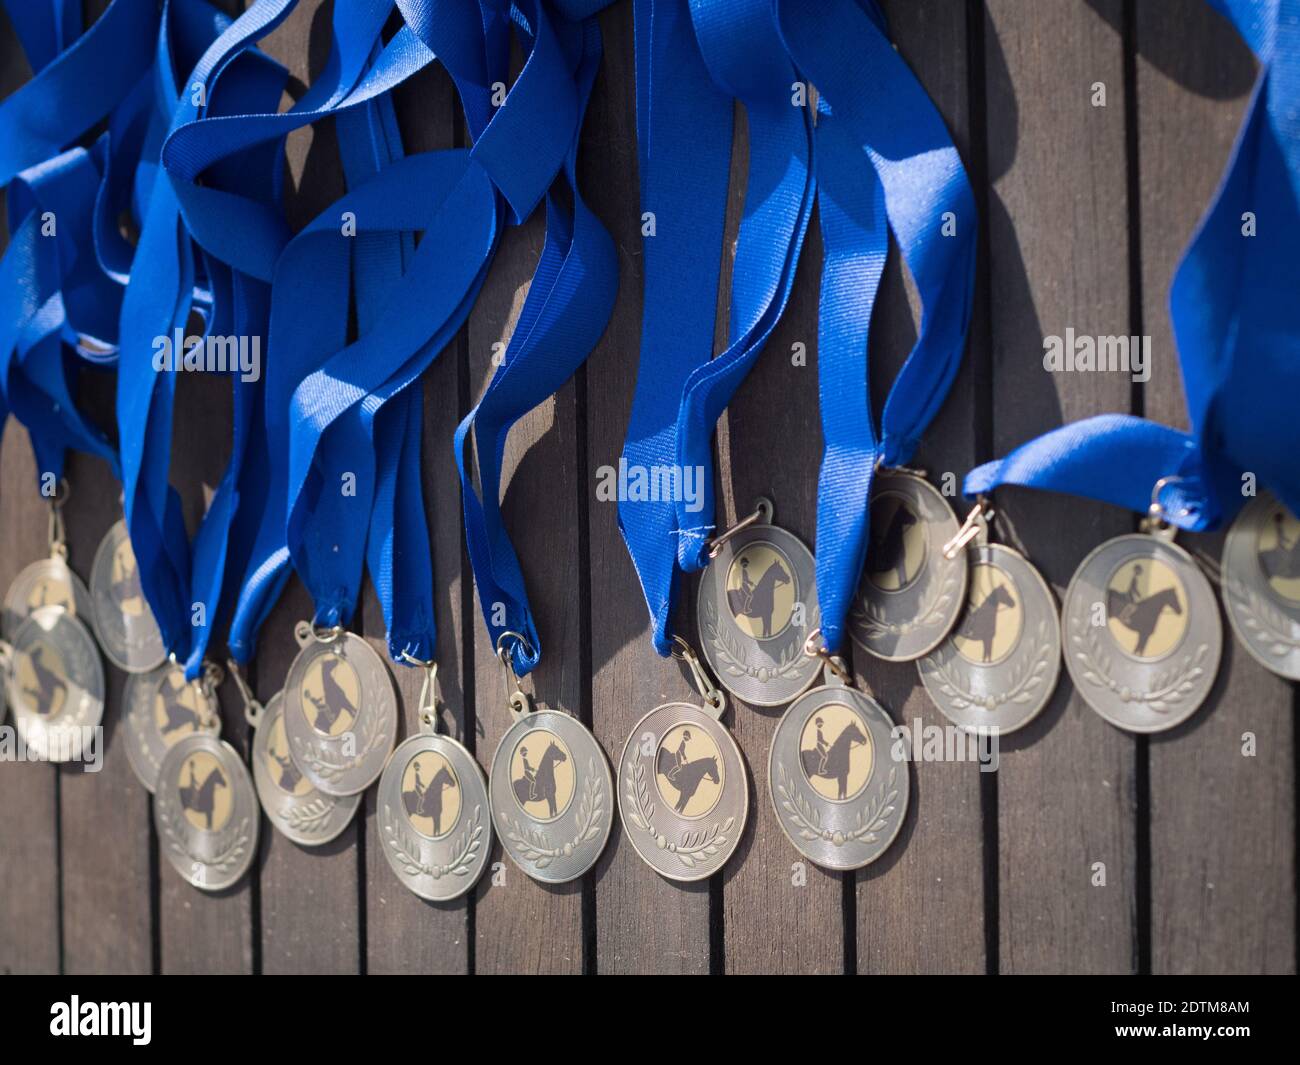 Table with horse dressage medals with a blue ribbon. Stock Photo